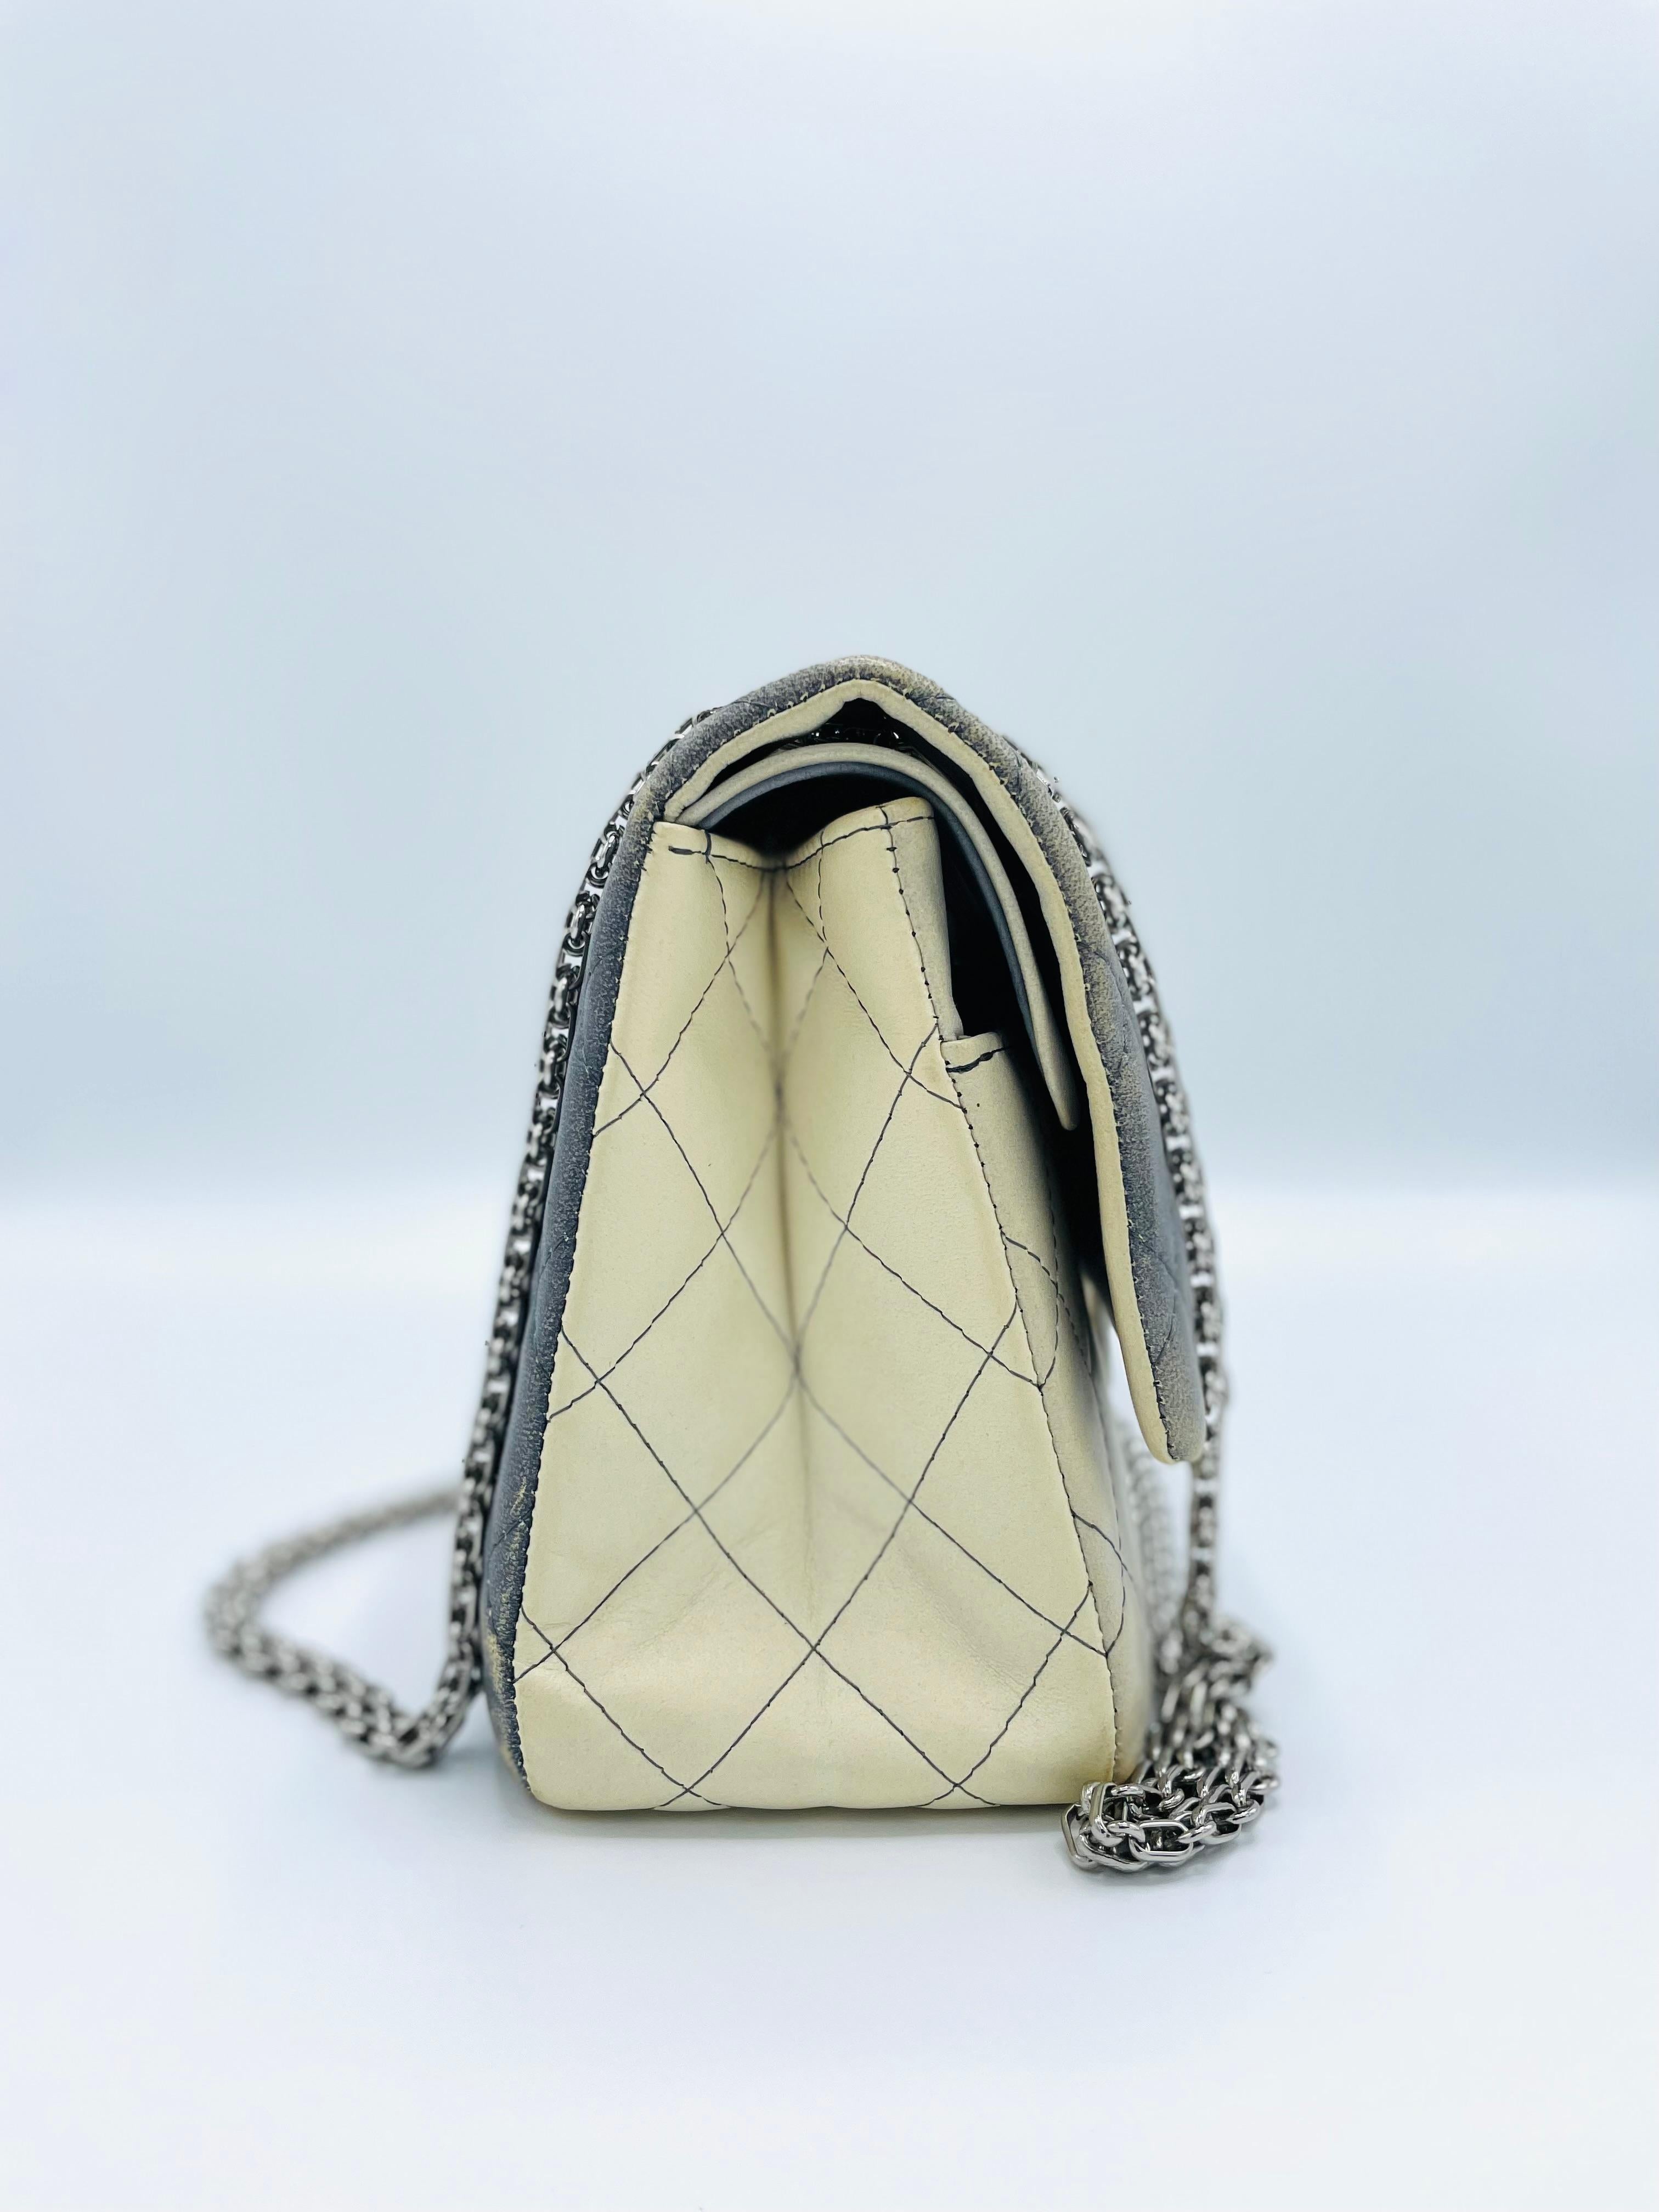 Chanel Double Hybrid Degrade Ombre Grey & Cream Quilted Lambskin 2.55 Reissue 227 Double Flap Shoulder Bag. The handbag is made from a luxurious ombre grey and cream quilted lambskin with silver hardware. It also incorporates the Mademoiselle Lock